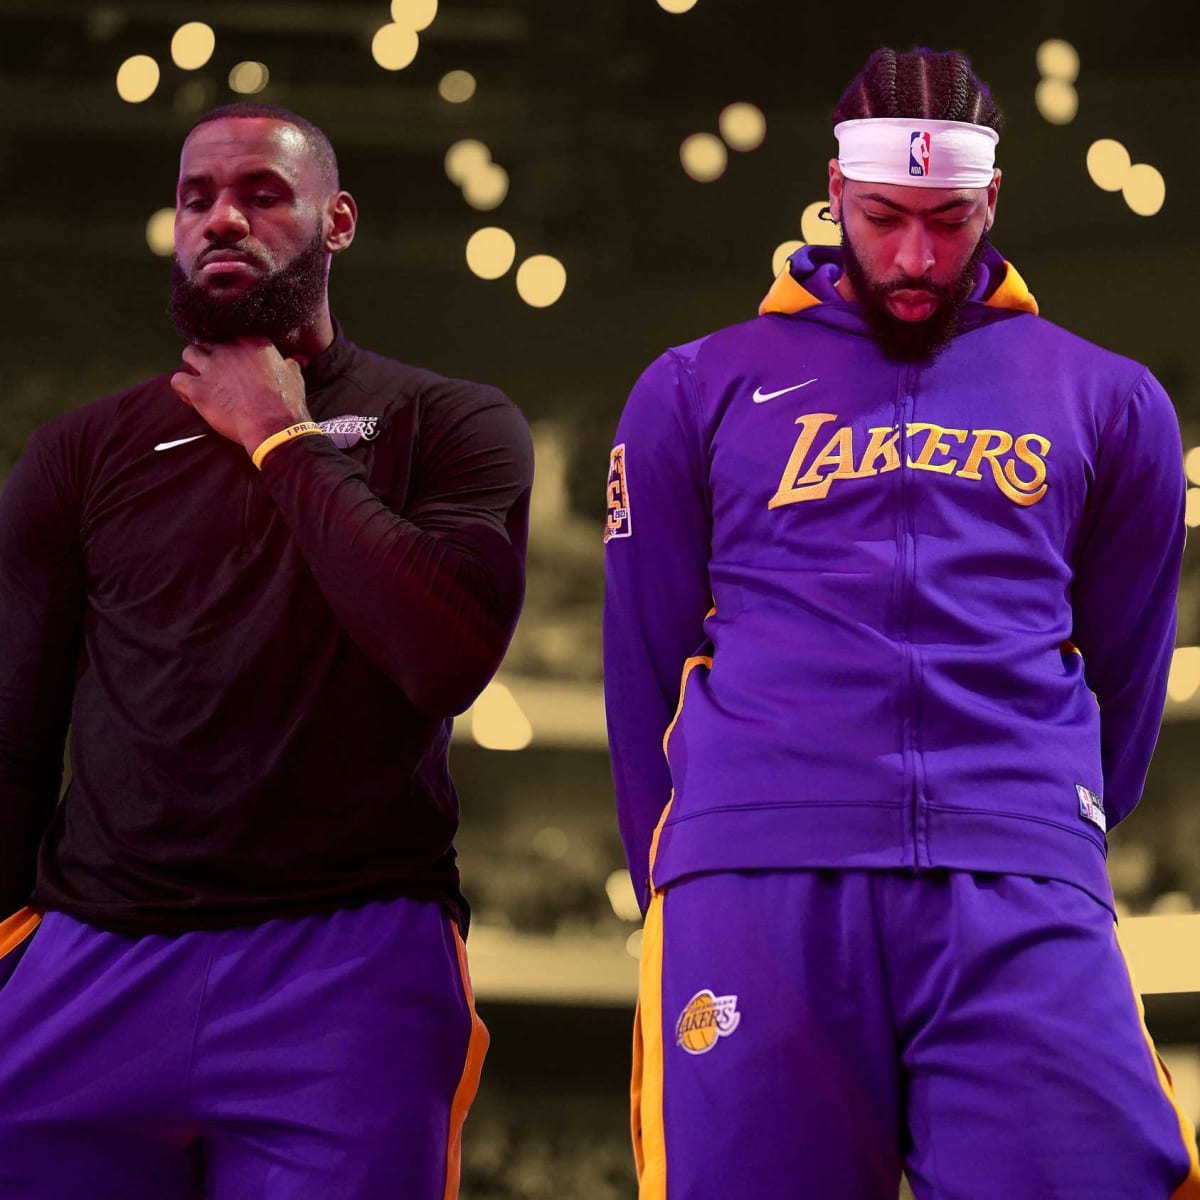 Stephen A. Smith sympathizes with LeBron James citing how Anthony Davis has  let him down - Basketball Network - Your daily dose of basketball